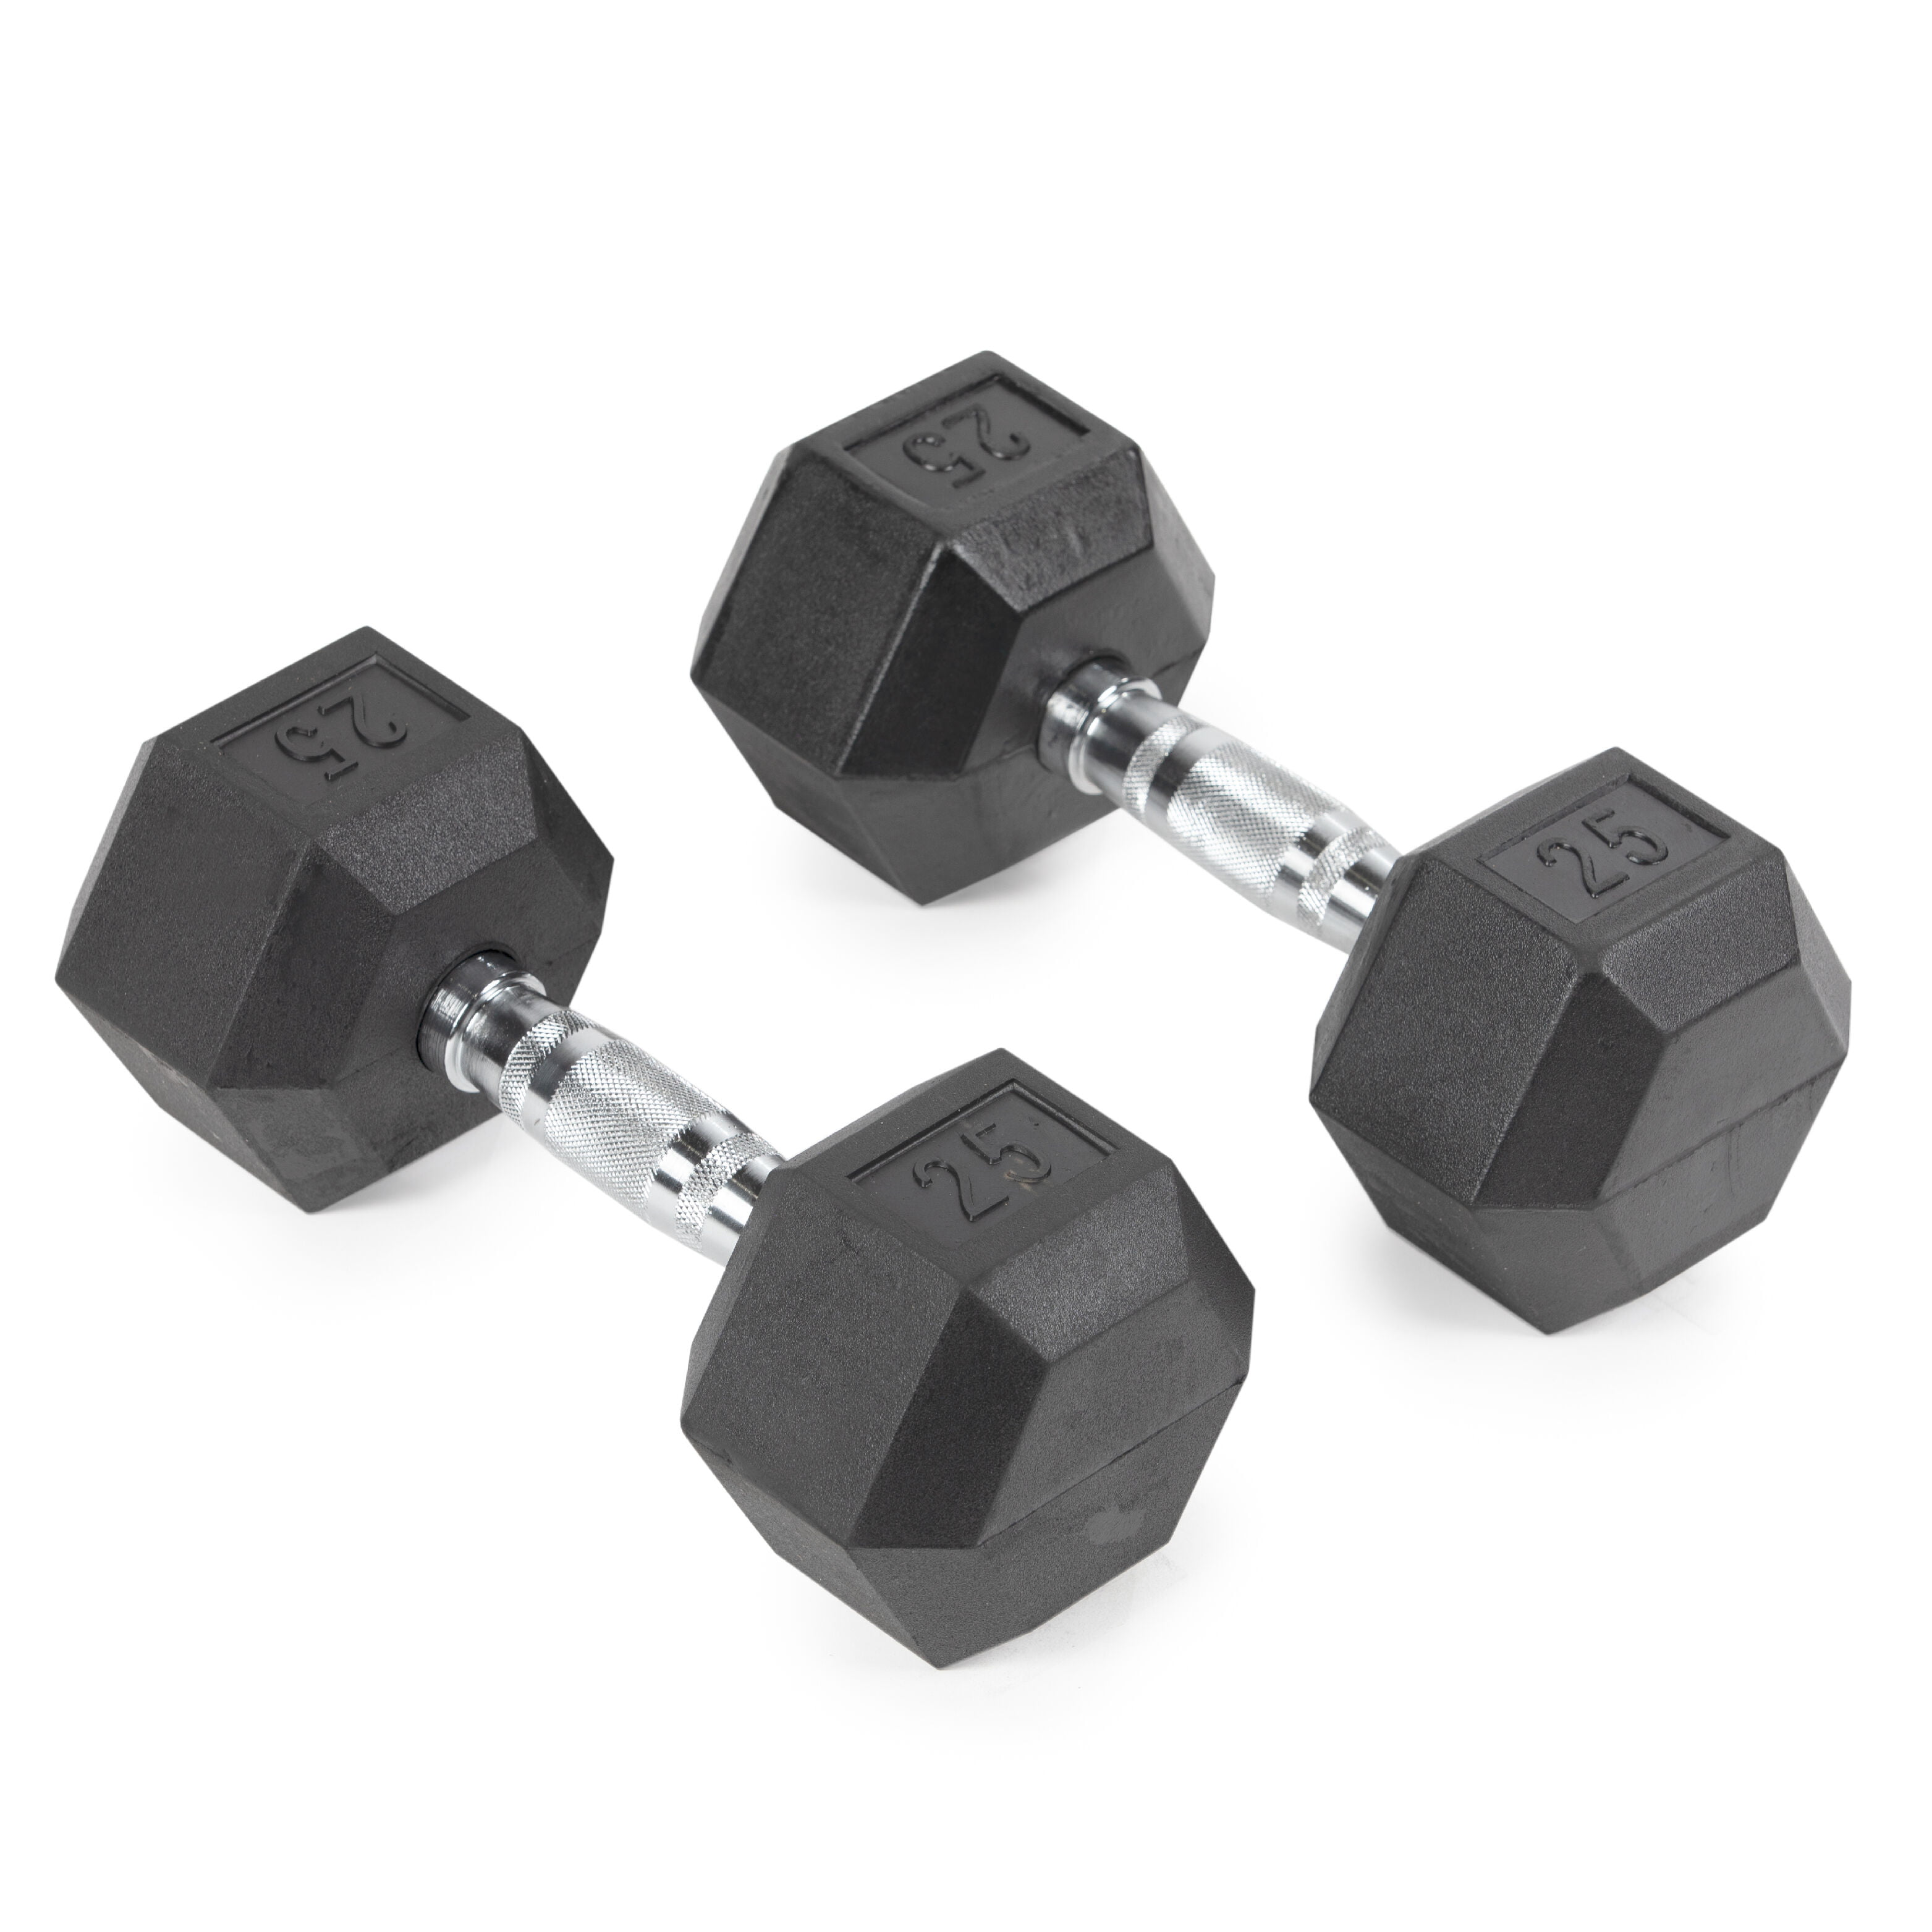 Dumbbells Set Heavy Weights Hex Dumbell Set Hexagonal Rubber Dumbbell with Metal Handles Anti-Rolling for Weightlifting Bodybuilding Exercise Fitness Workout Training Home Gym 10-30kg Single & Sets